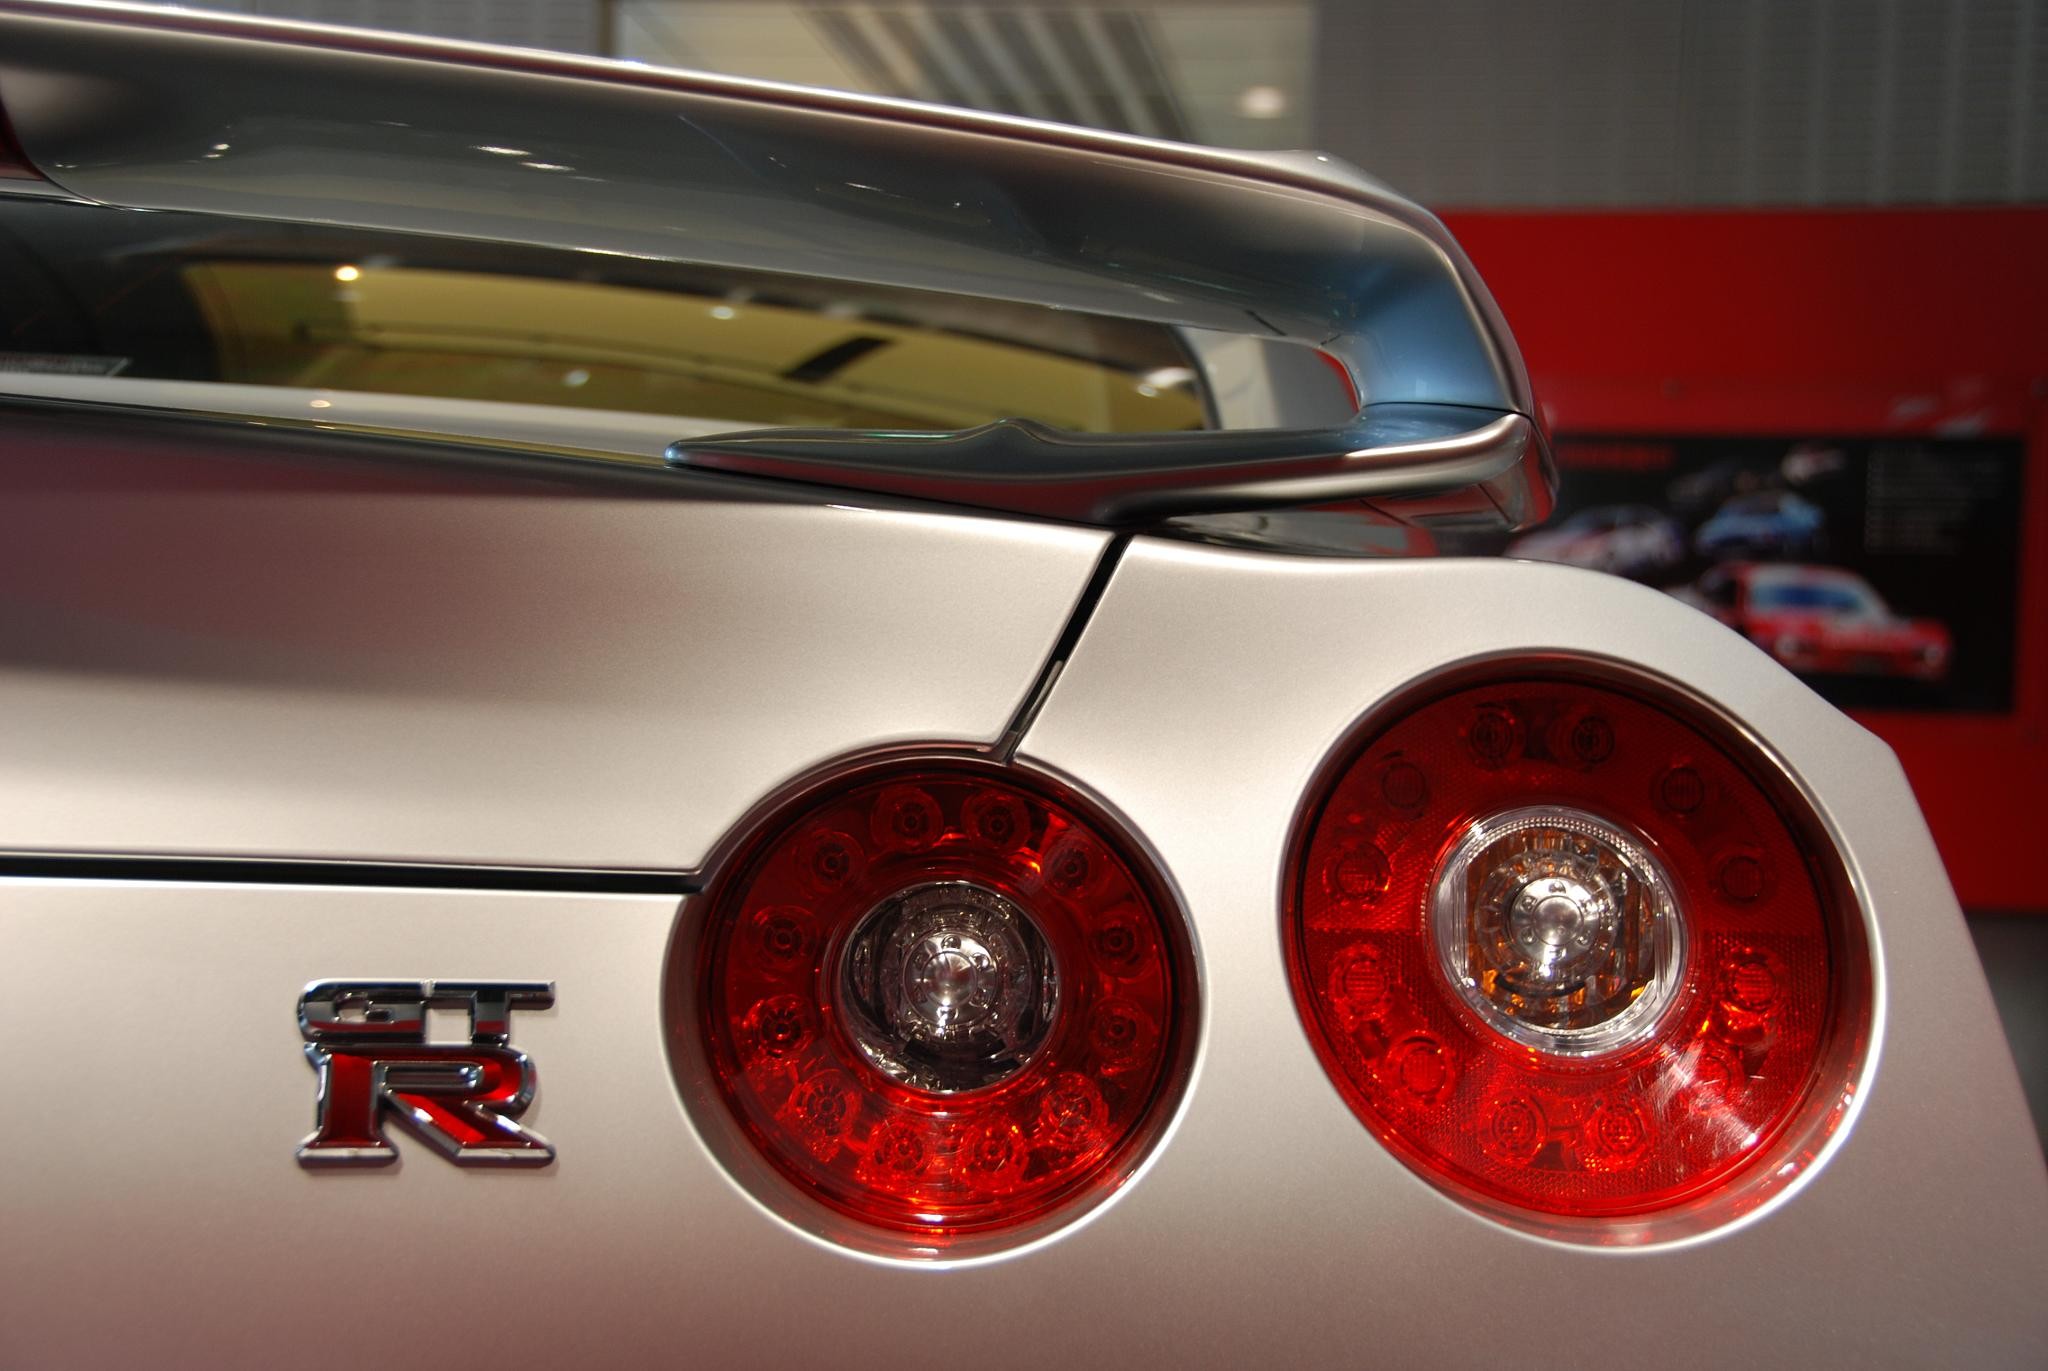 General 2048x1371 car vehicle red Nissan GT-R Nissan silver cars closeup taillights